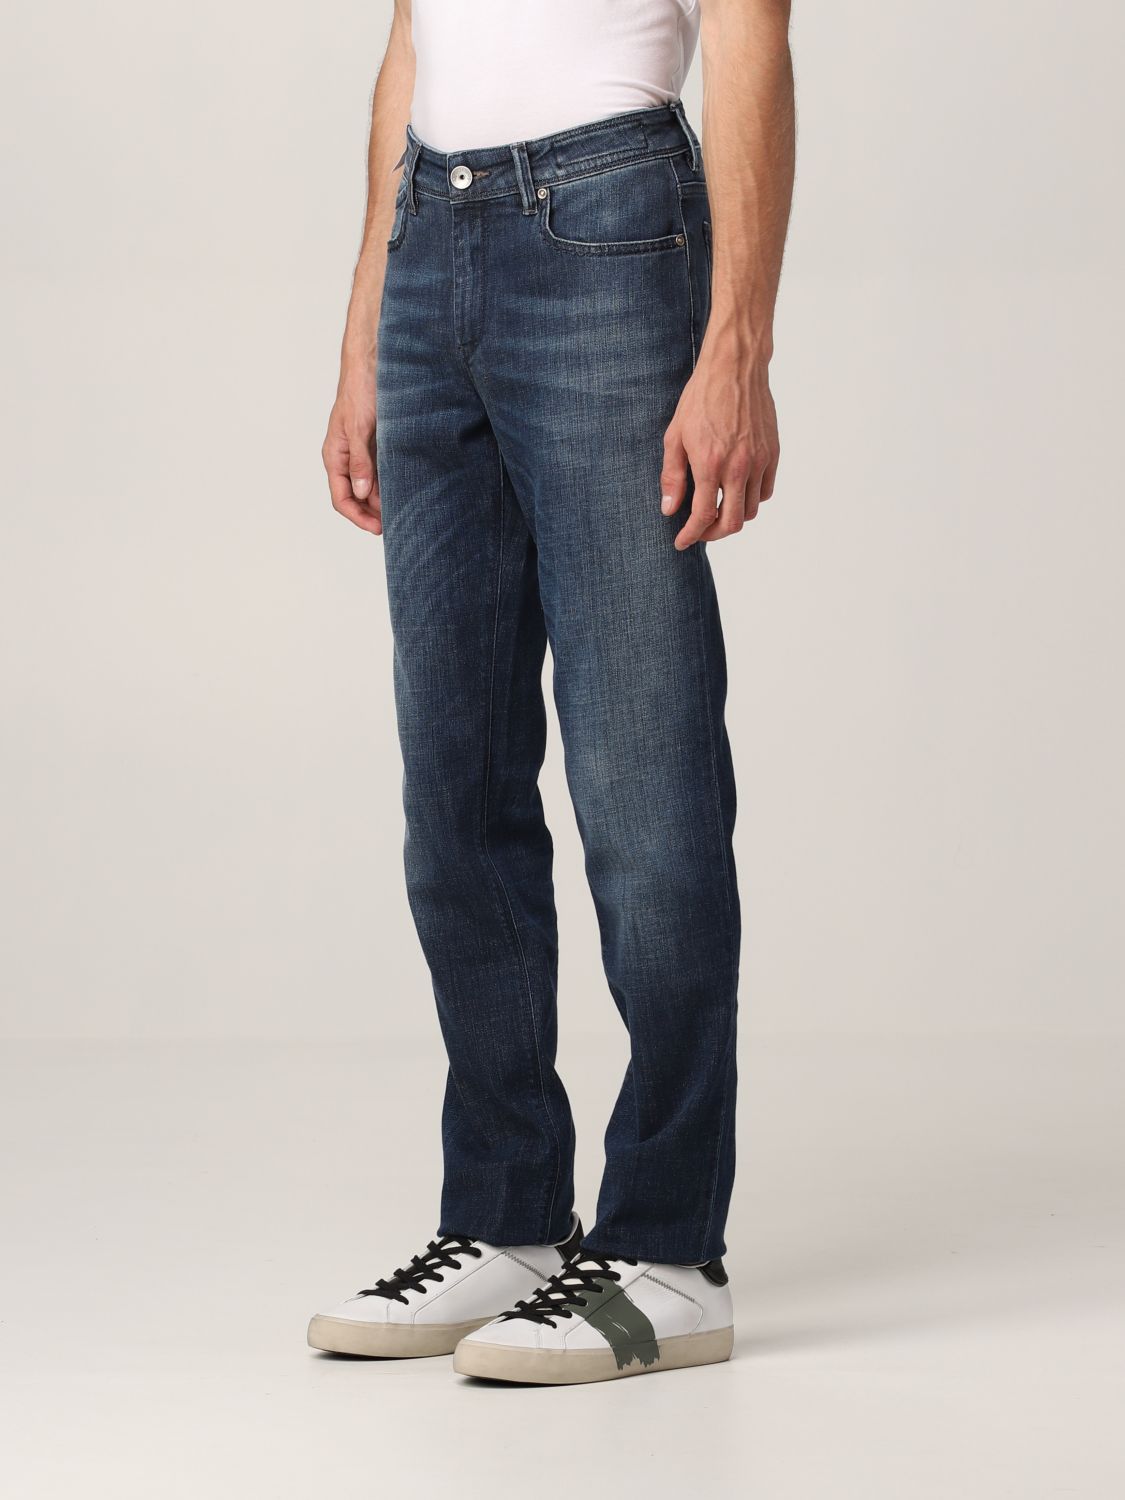 Jeans Re-Hash: Jeans hombre Re-hash azul oscuro 3